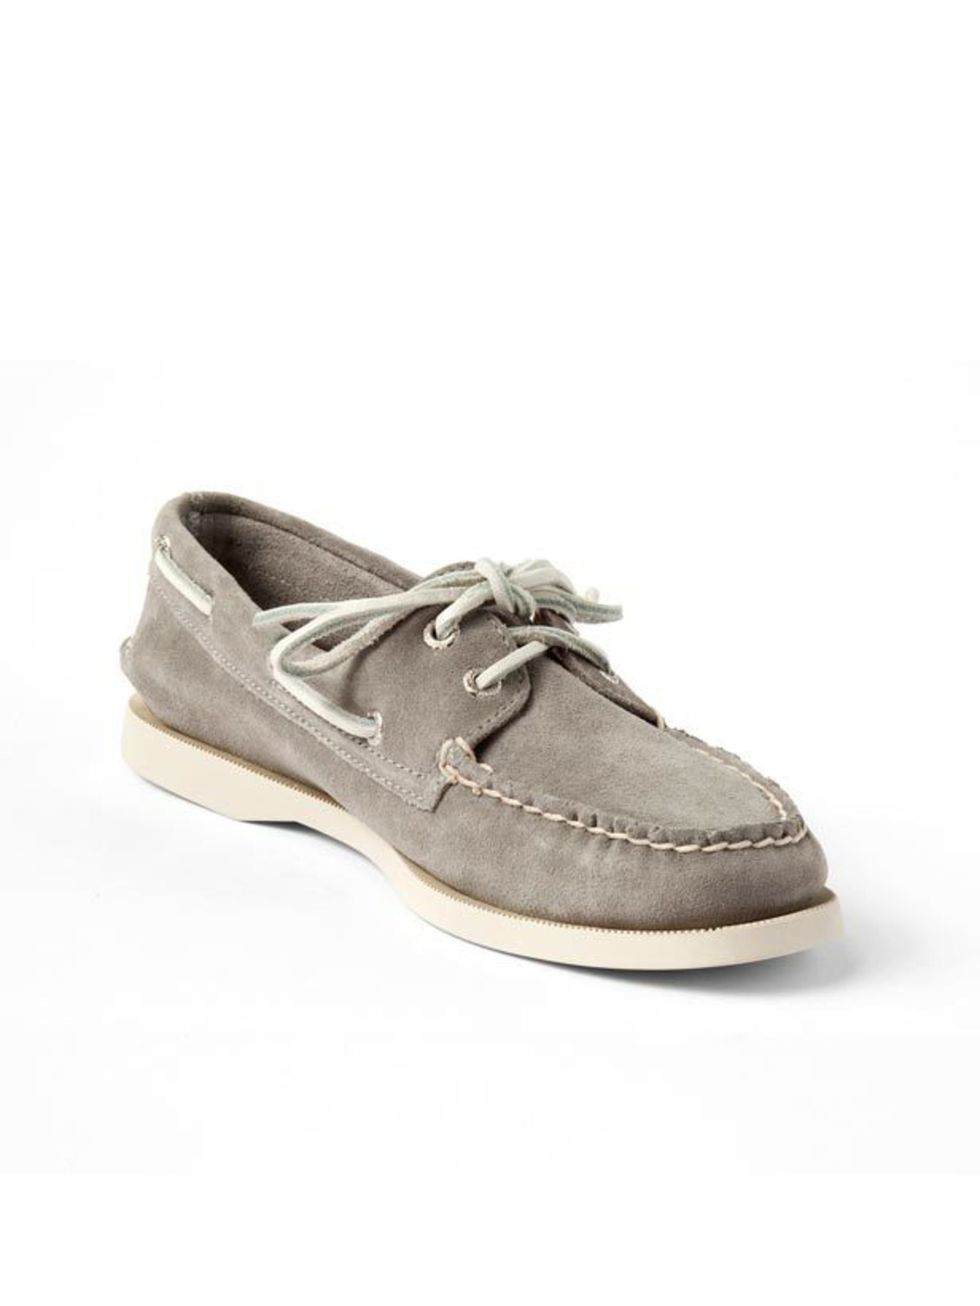 <p>Taupe suede deck shoes, £90, by S<a href="http://www.sperrytopsider.com/store/">perry Top-Sider </a></p>